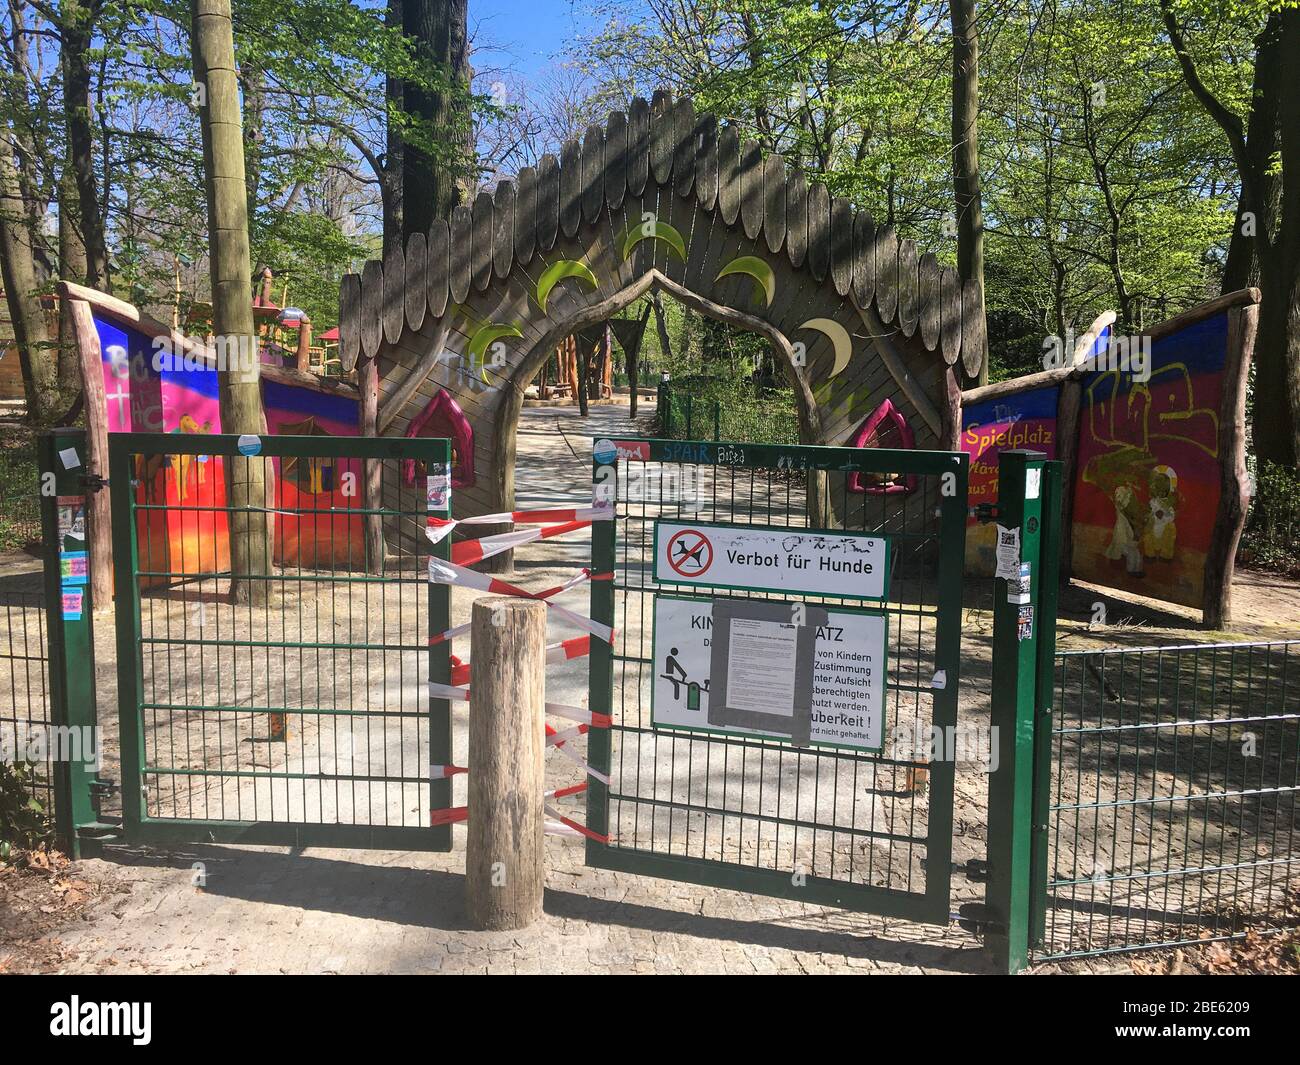 BERLIN, GERMANY - APRIL 12, 2020: Closed Playground in Public Park Hasenheide due to Corona Pandemic (Covid 19) lockdown. Notice by the City of Berlin Stock Photo